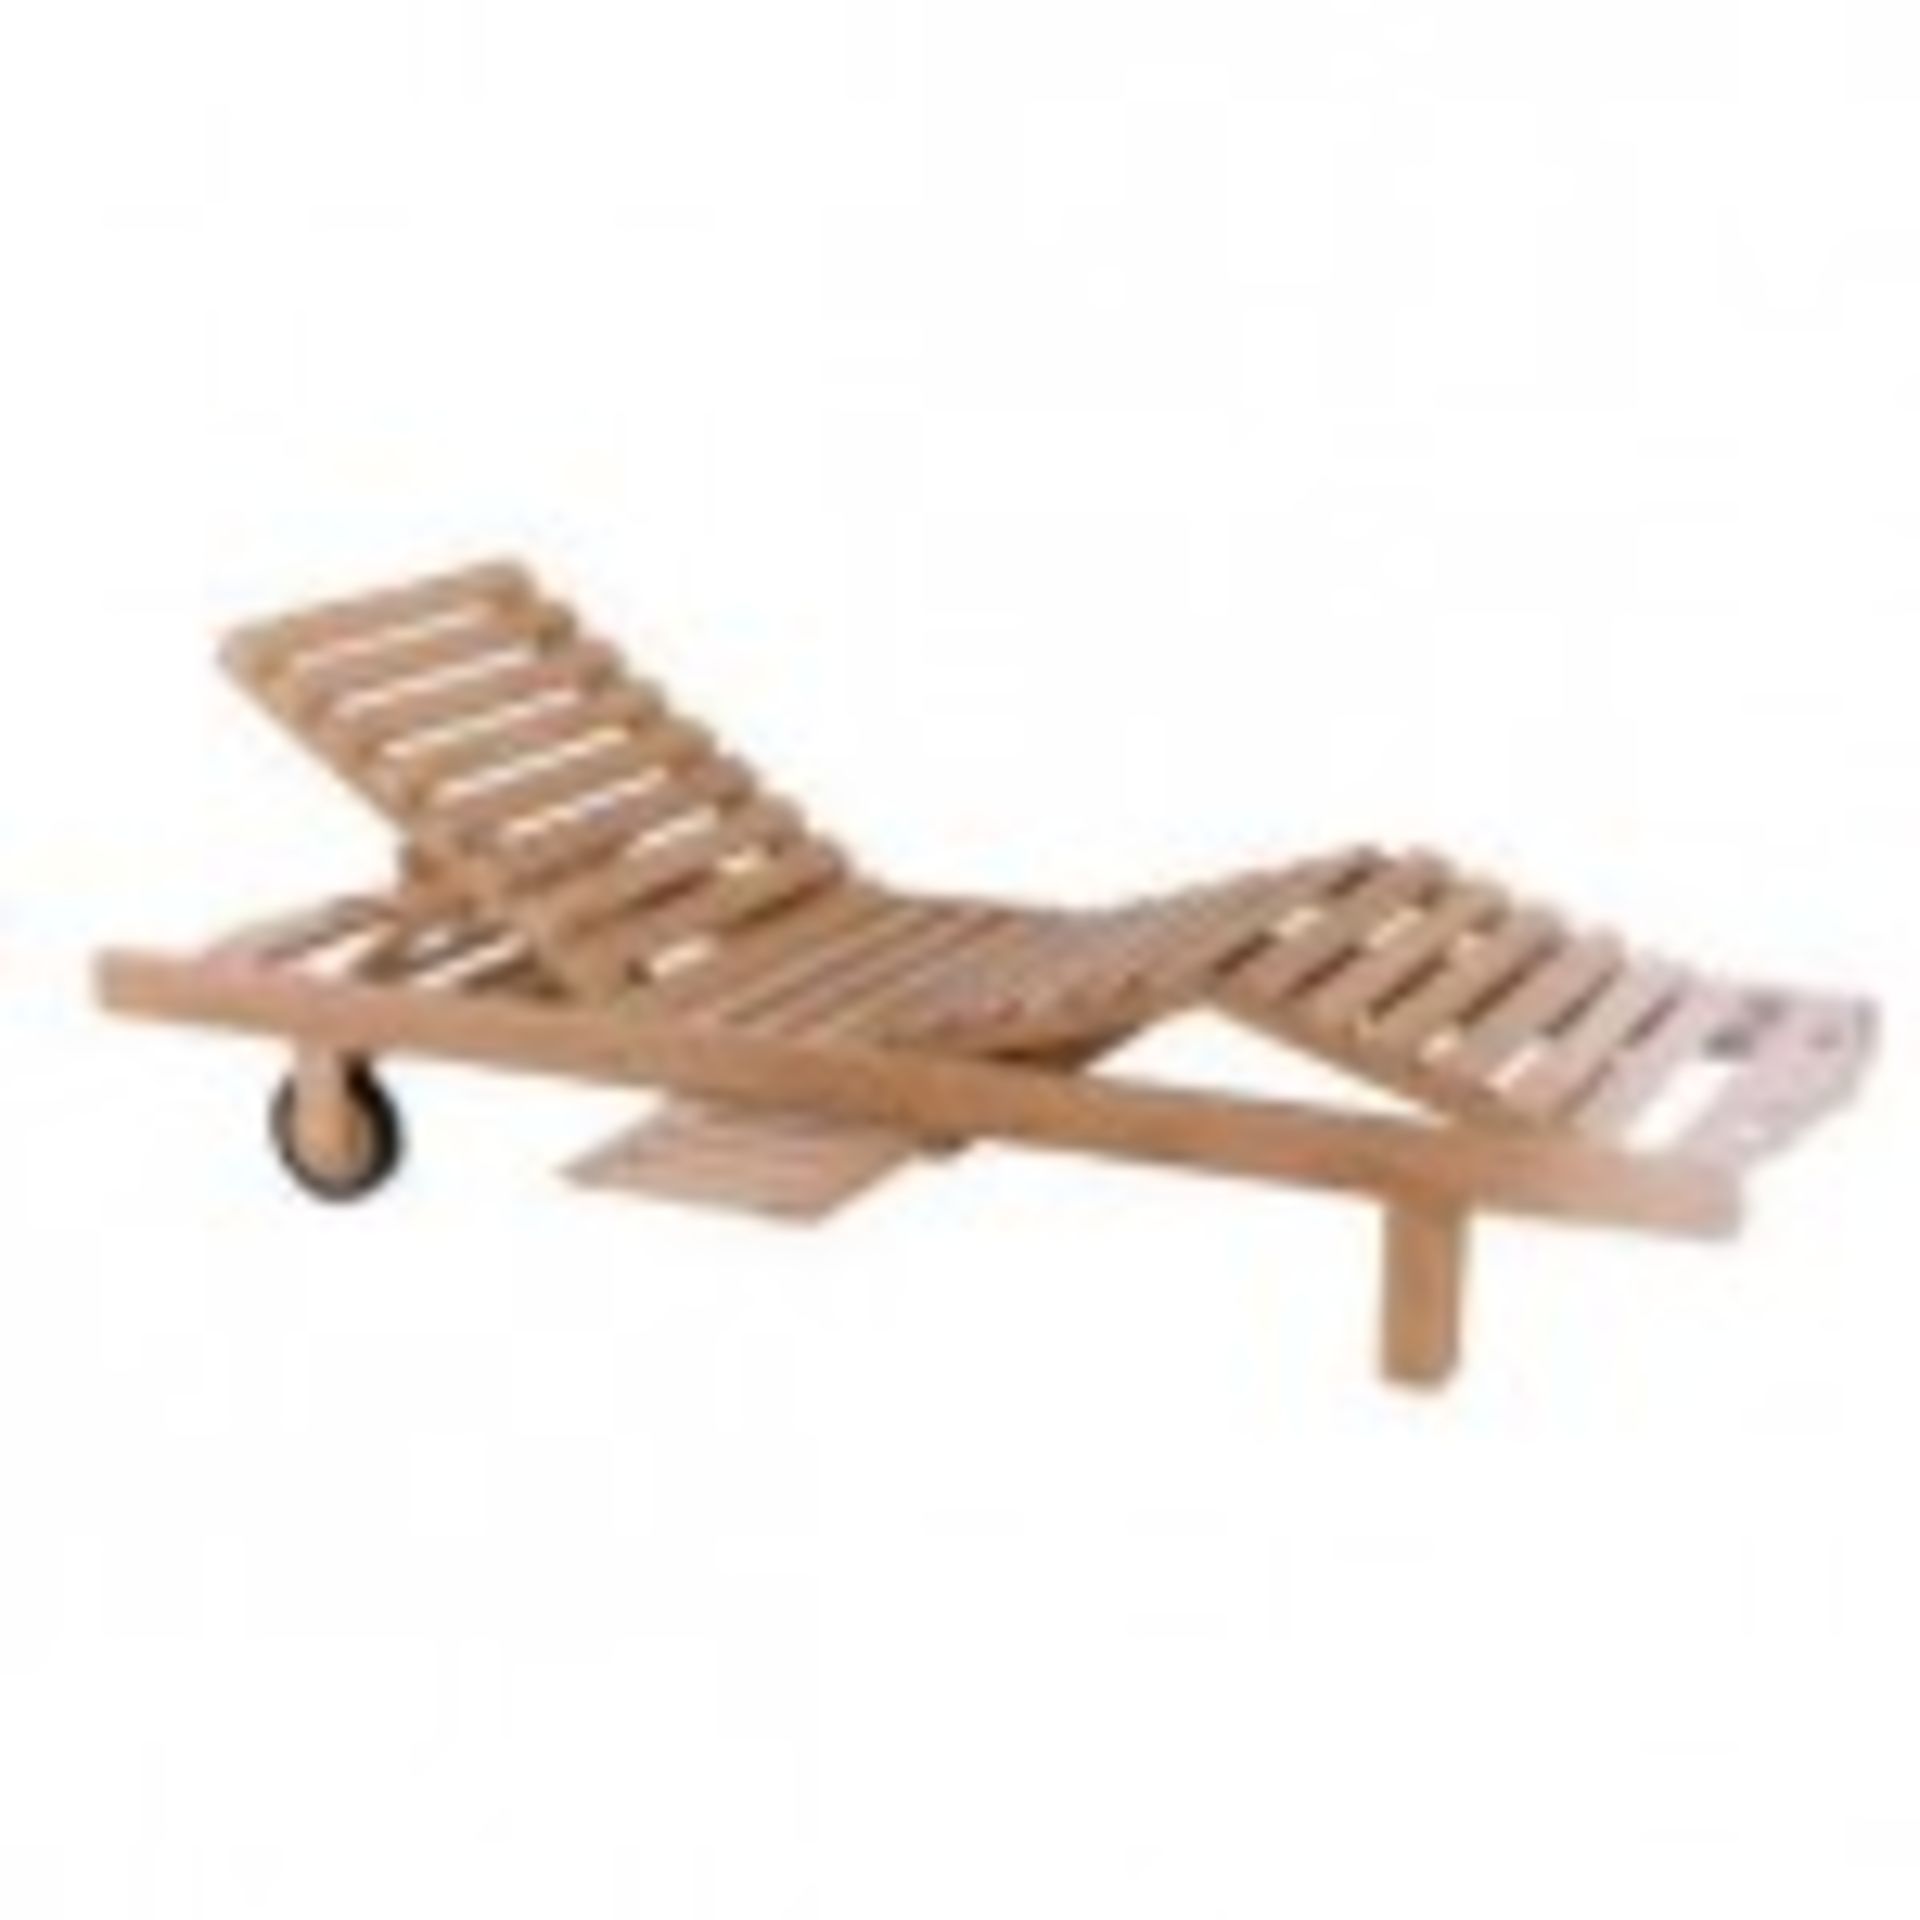 V Brand New Sunlounger (With Back Incline & Leg Lift + Sliding Drinks Tray) - 209 x 65 x 28 - RRP £